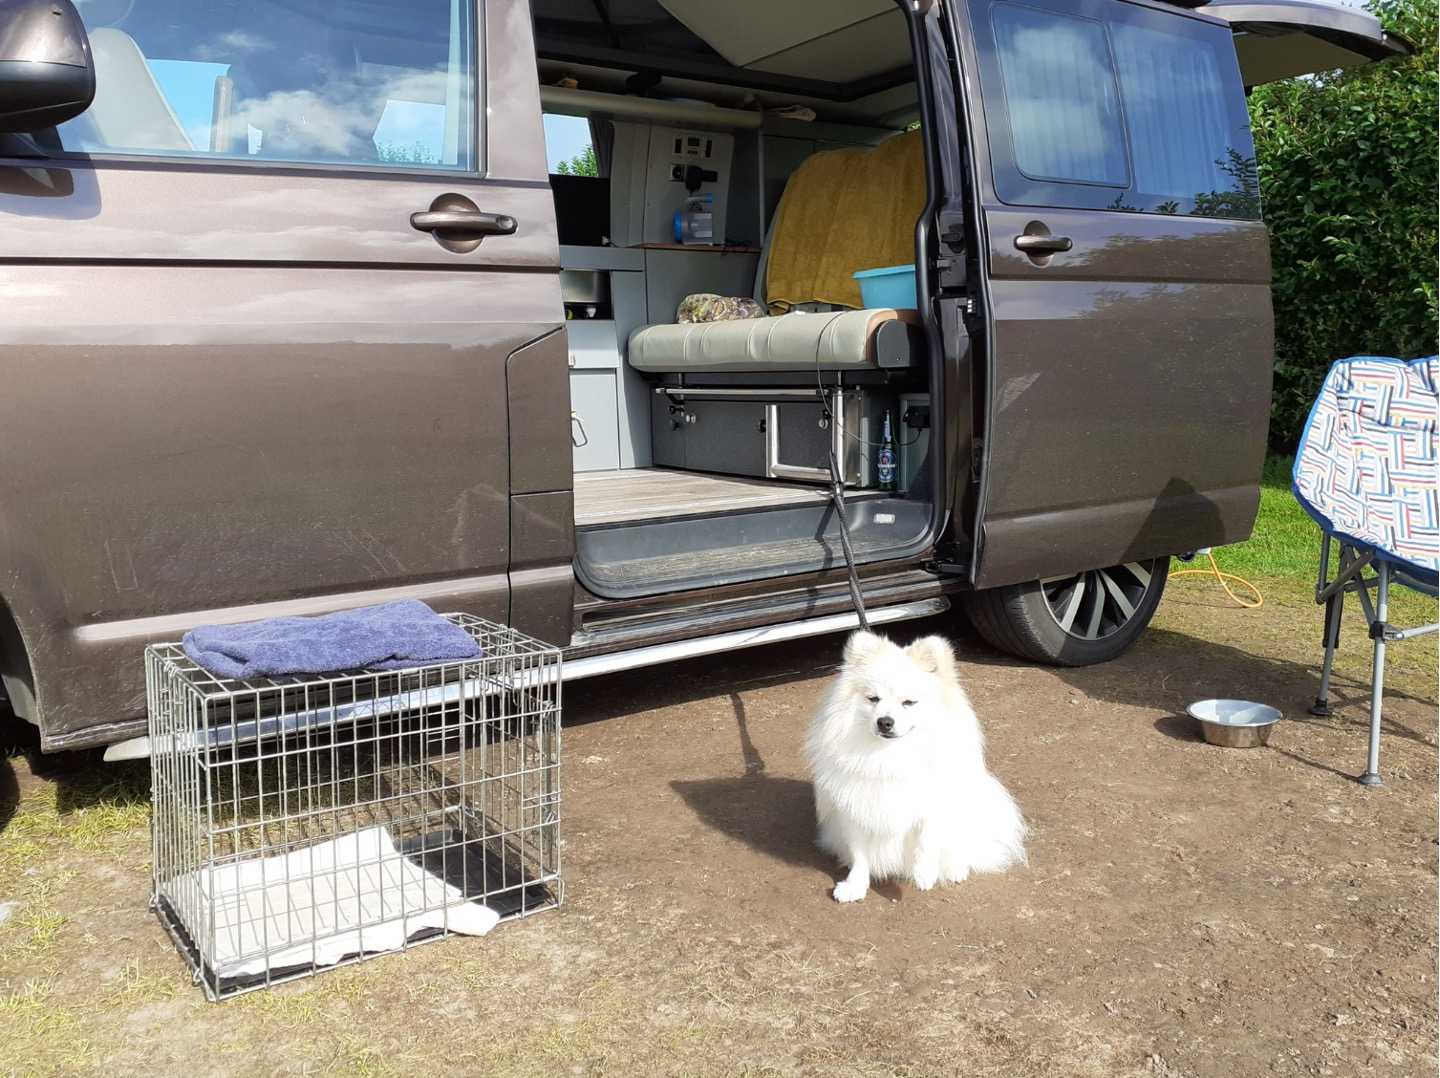 A dog with a crate by a campervan